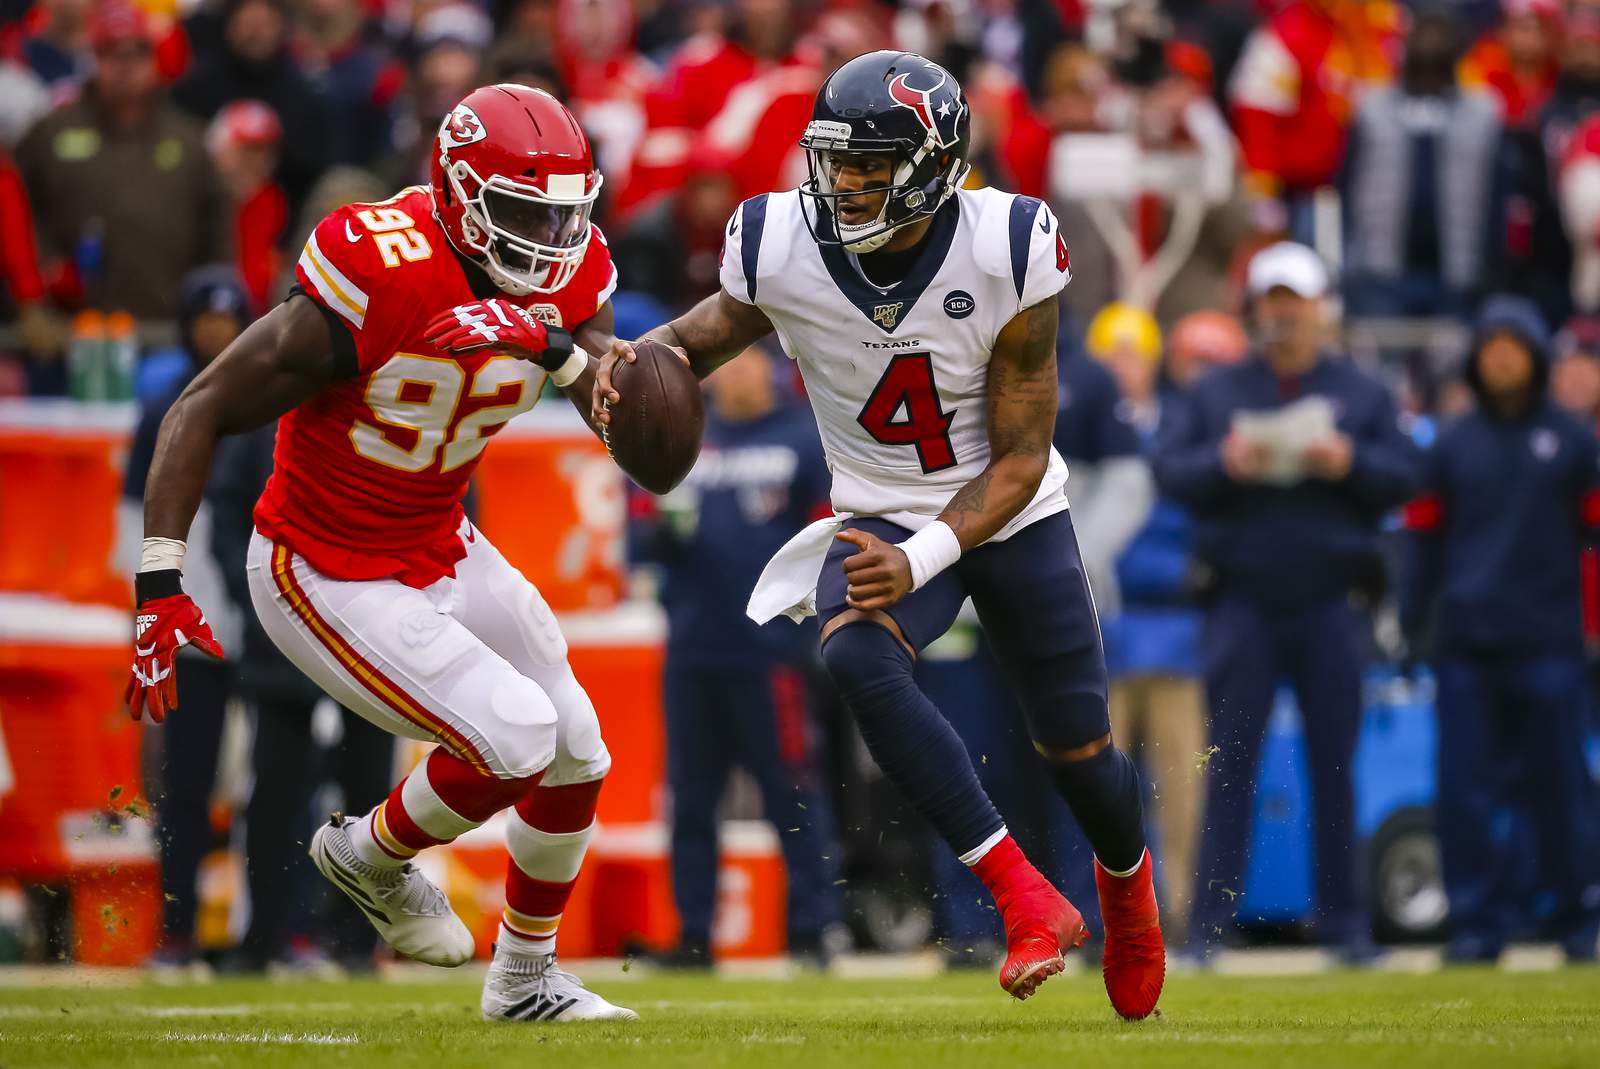 Texans-Chiefs set to kick off NFL season unlike any other